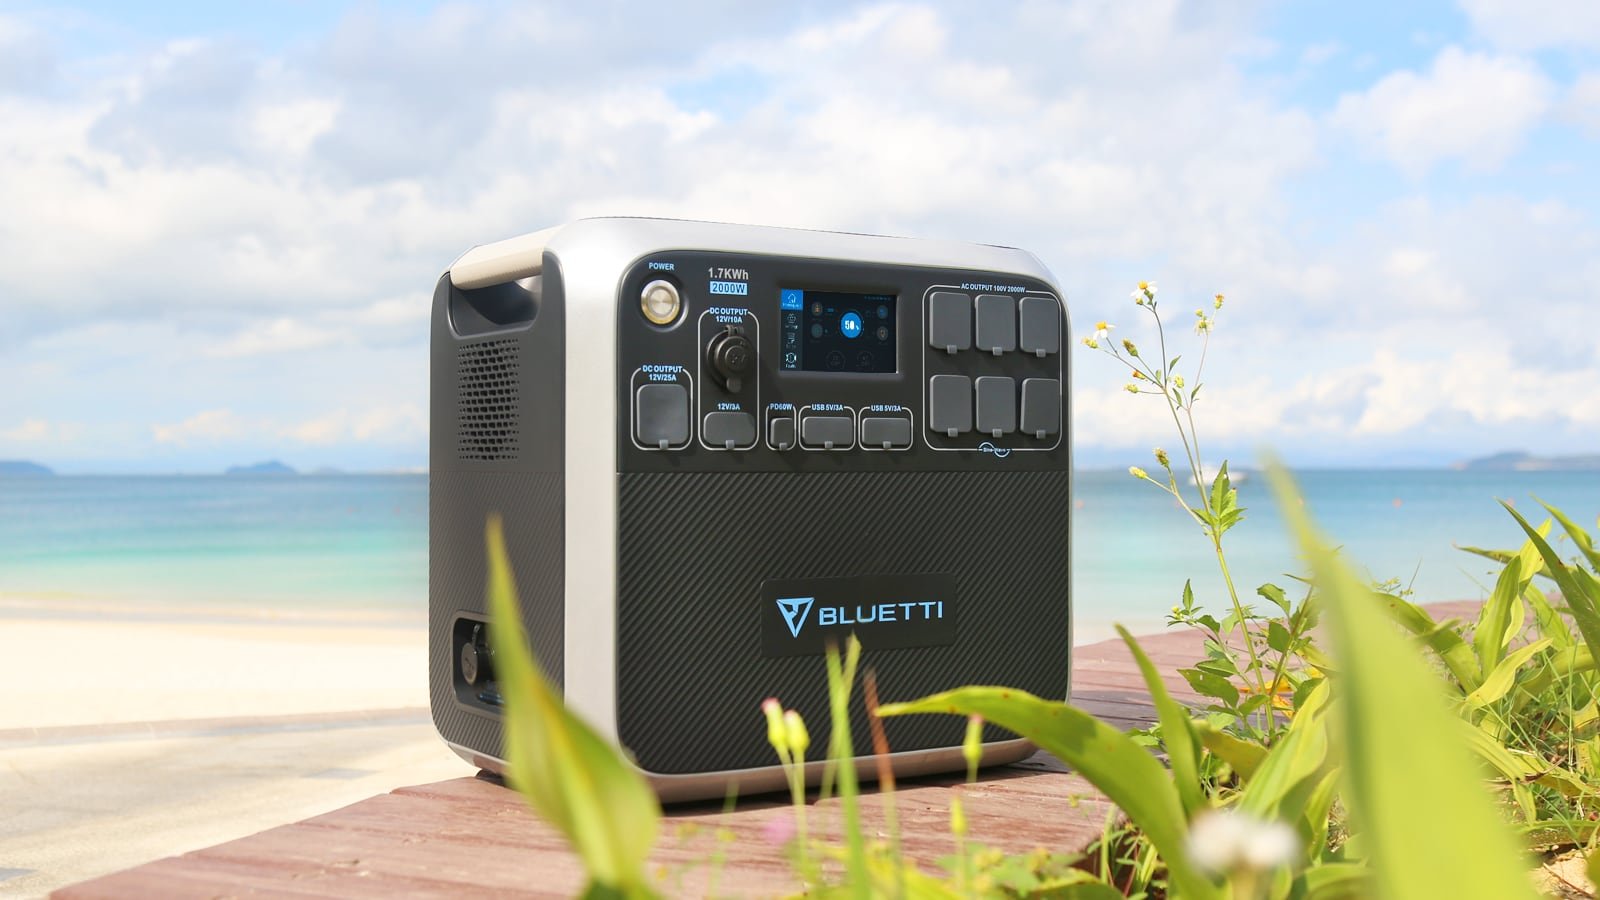 Bluetti AC200 Portable Solar Power Station offers 2,000 W for at home, outdoor, RV, and emergency use